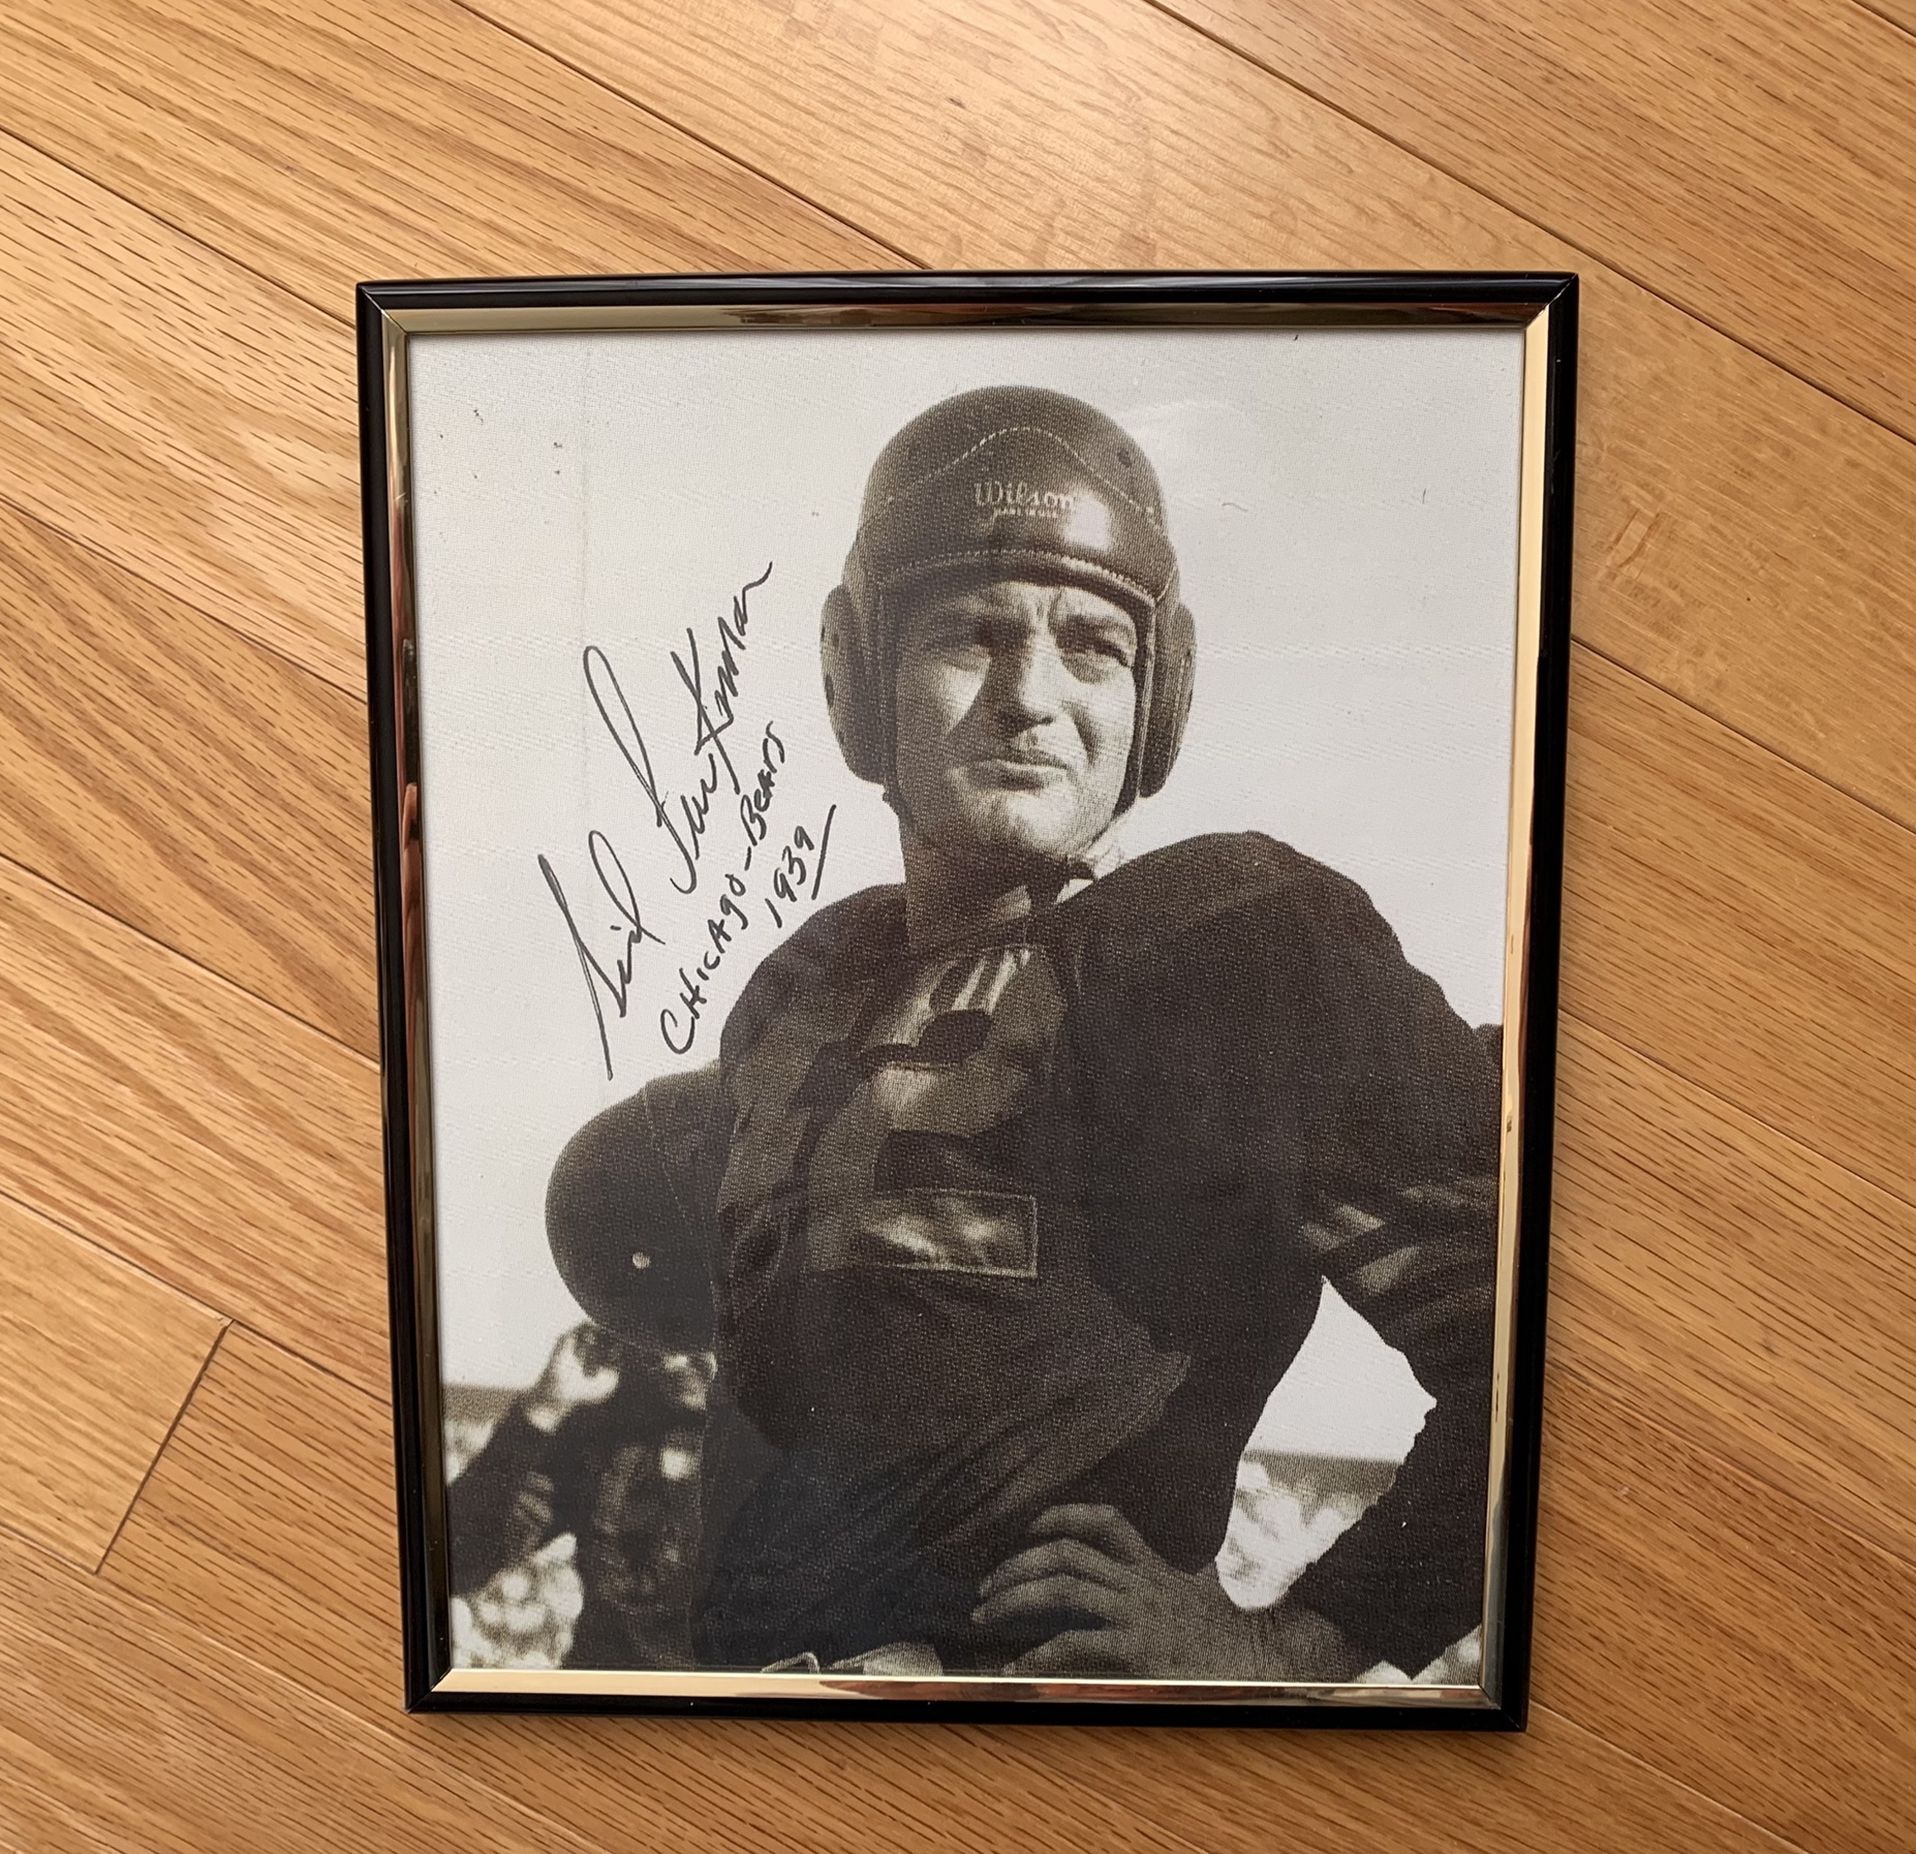 Did Luckman Chicago Bears Pro Football HOF Signed Autographed 8x10 Reprint